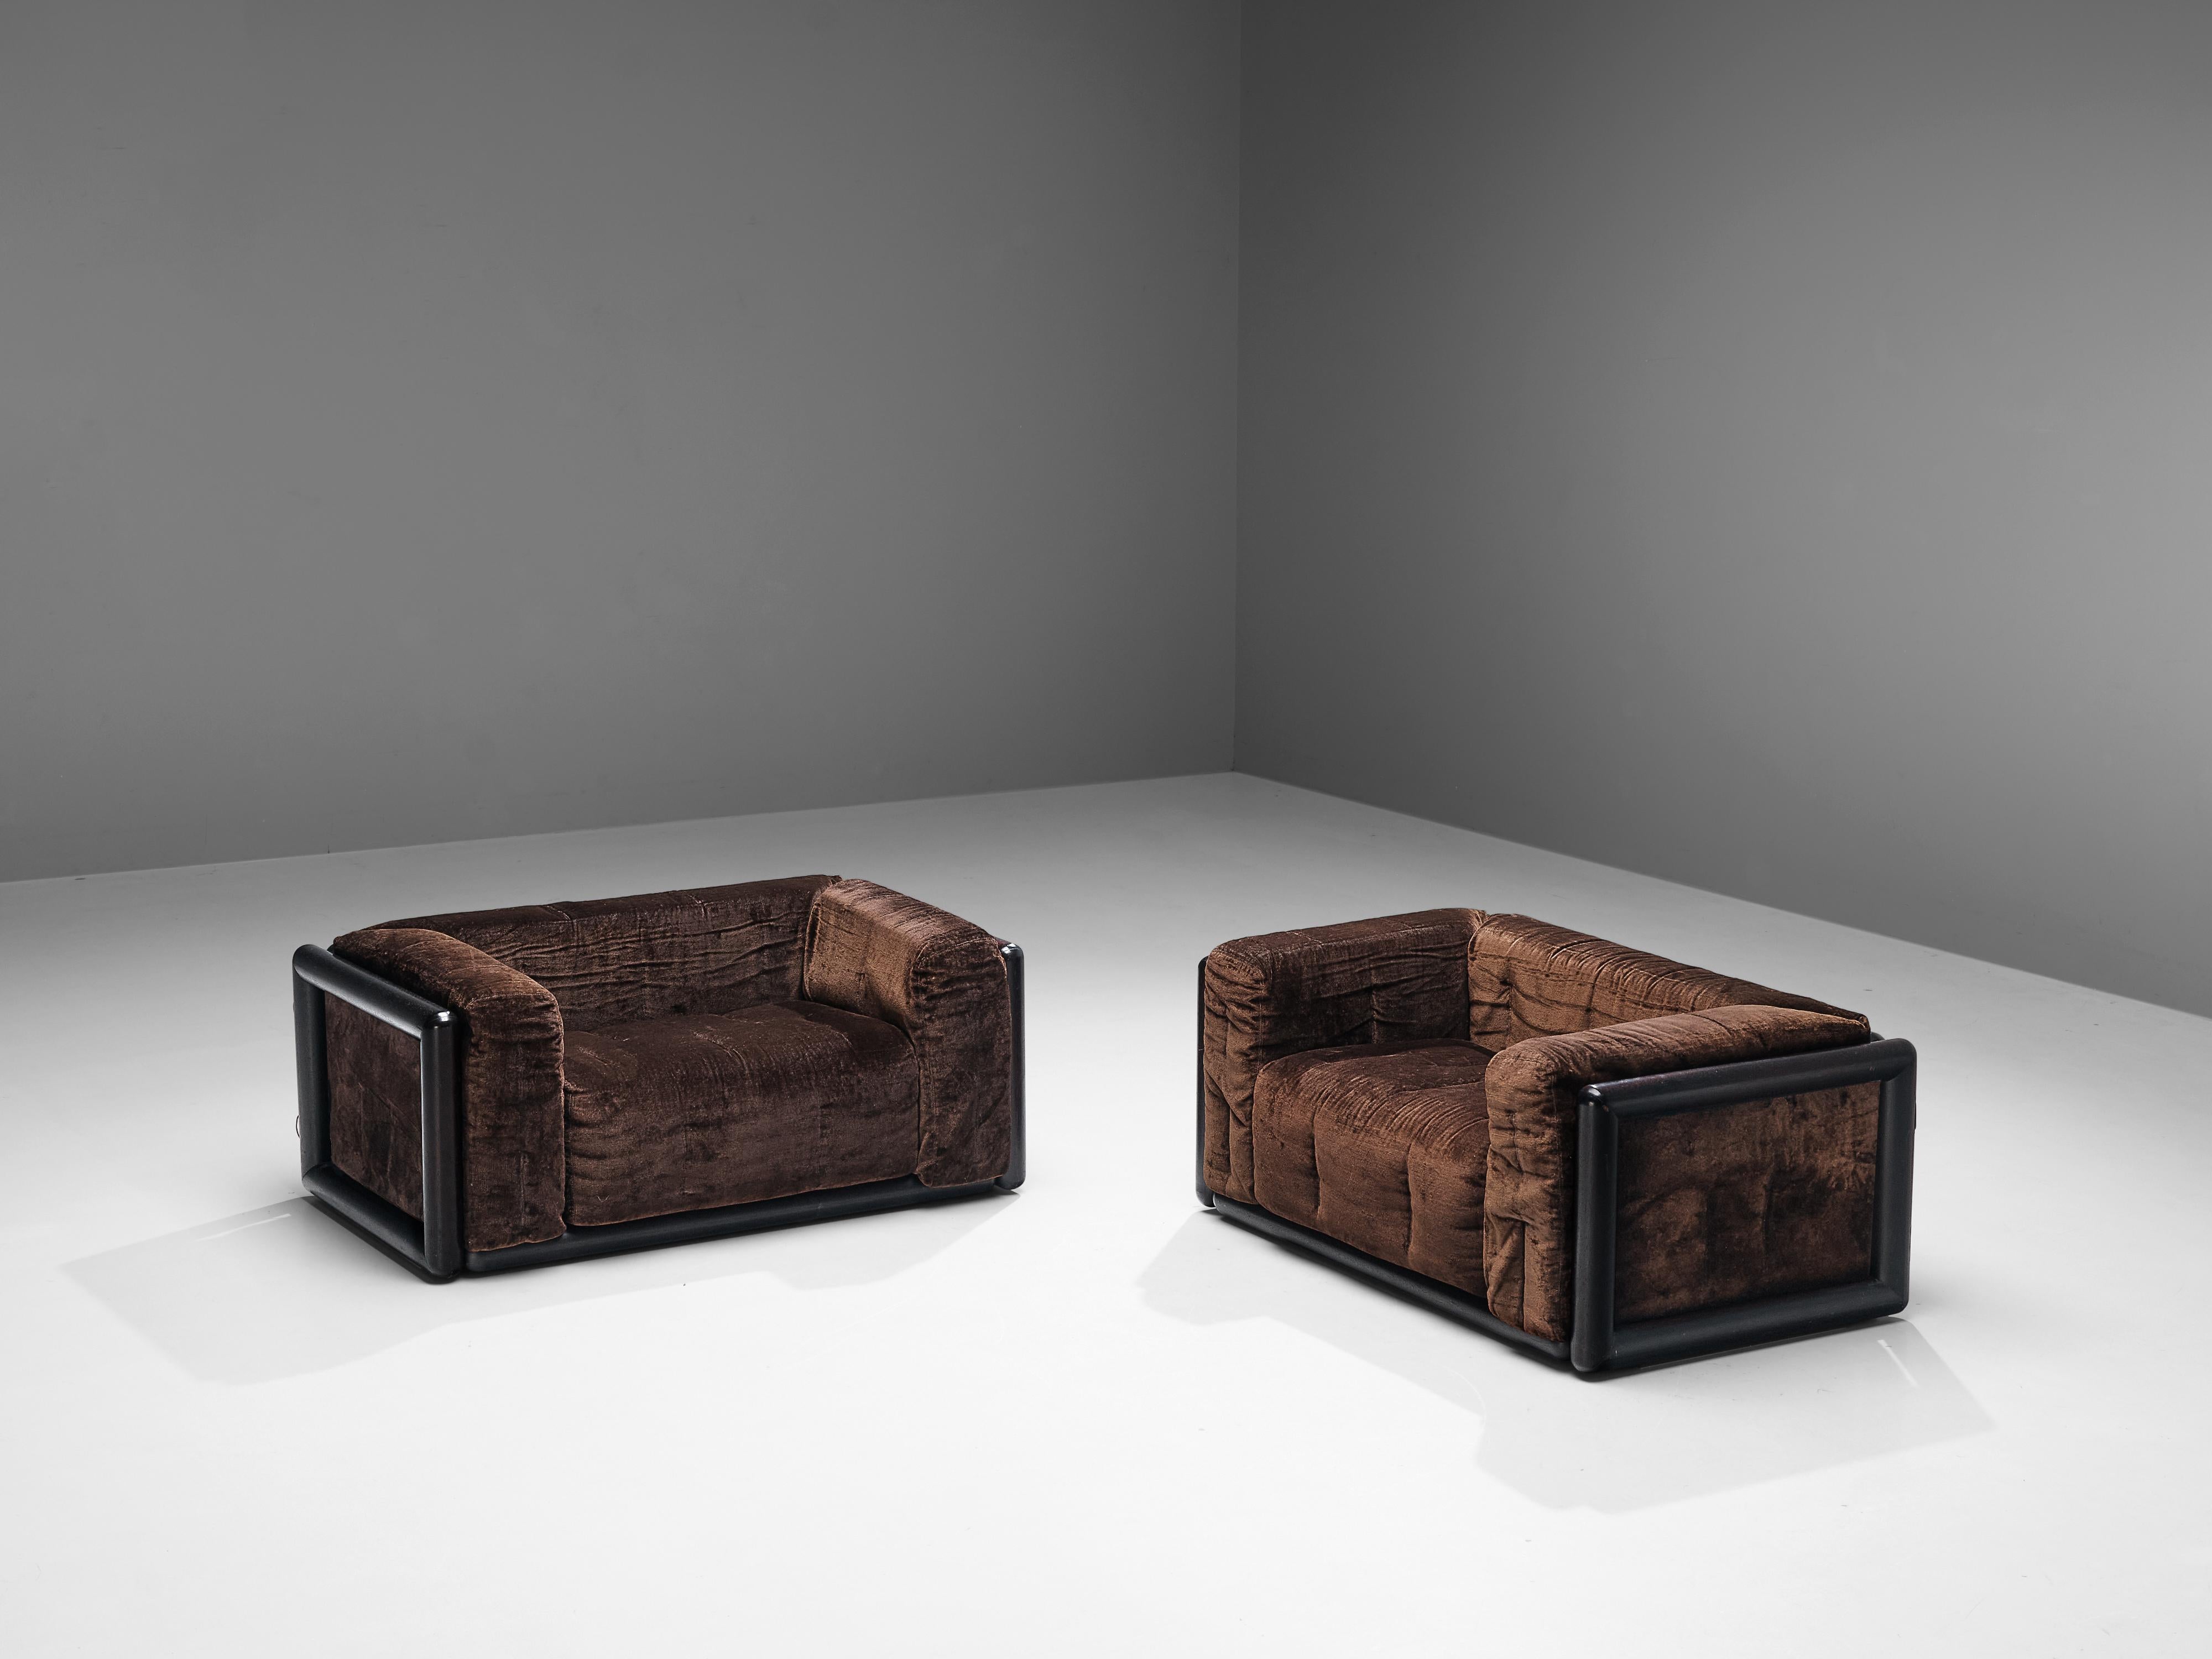 Carlo Scarpa for Simon, 'Cornaro' loveseats, fabric upholstery, wood, Italy, designed in 1973 

The 'Cornaro' sofa by Carlo Scarpa is a perfect example of the Ultrarazionale style; breaking away from the strict limits of Rationalism, resulting in a